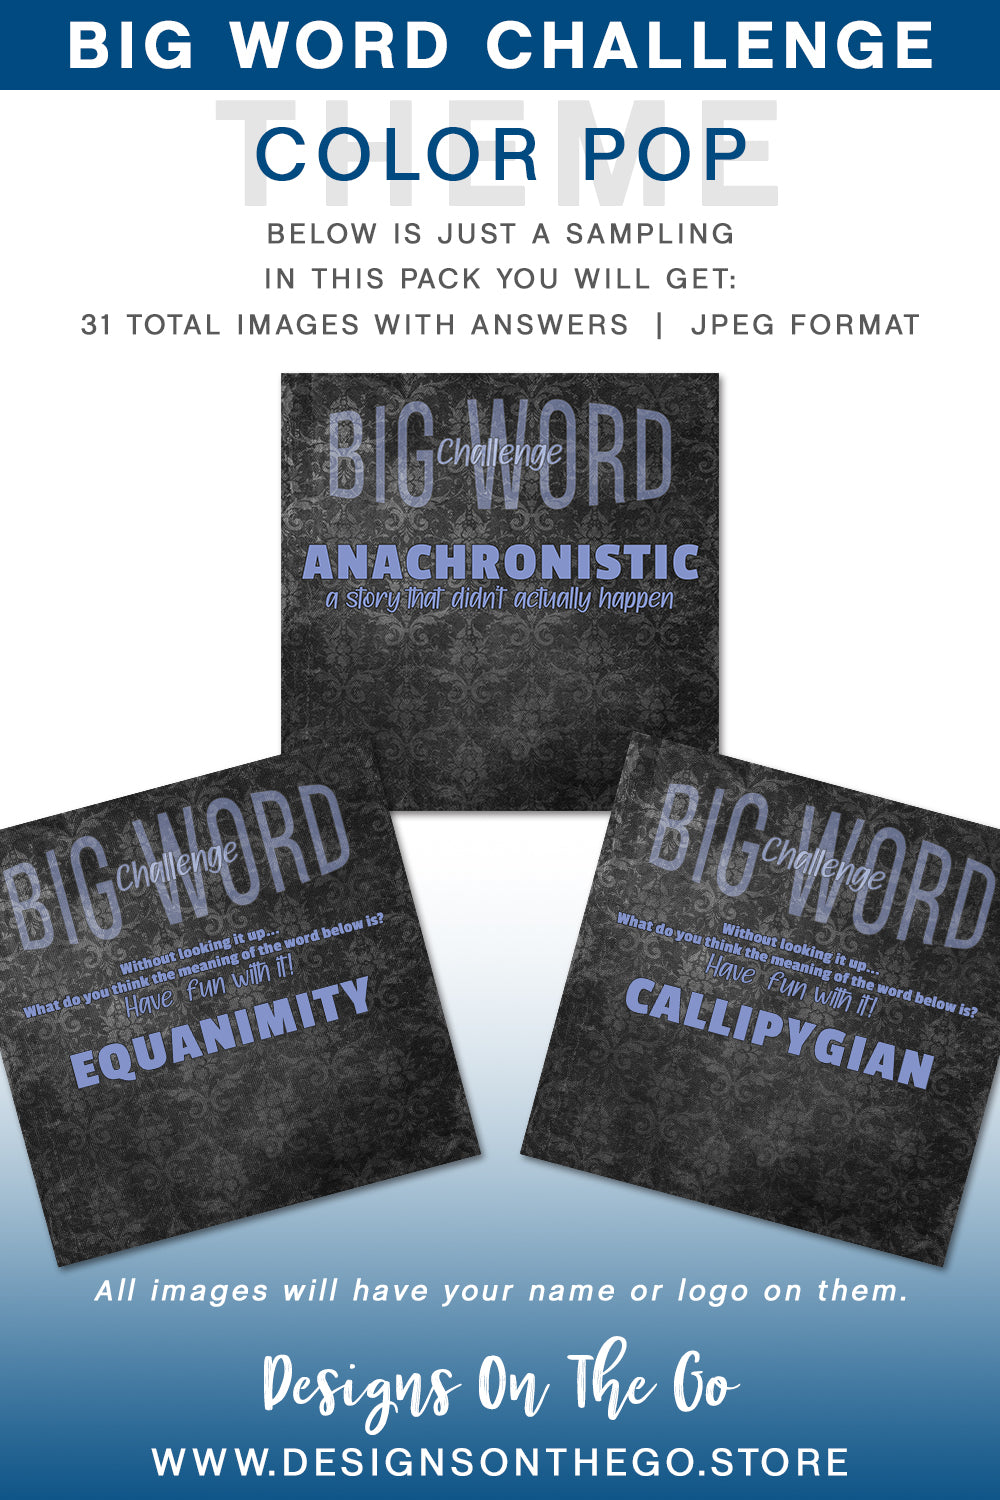 Big Word Daily Challenges